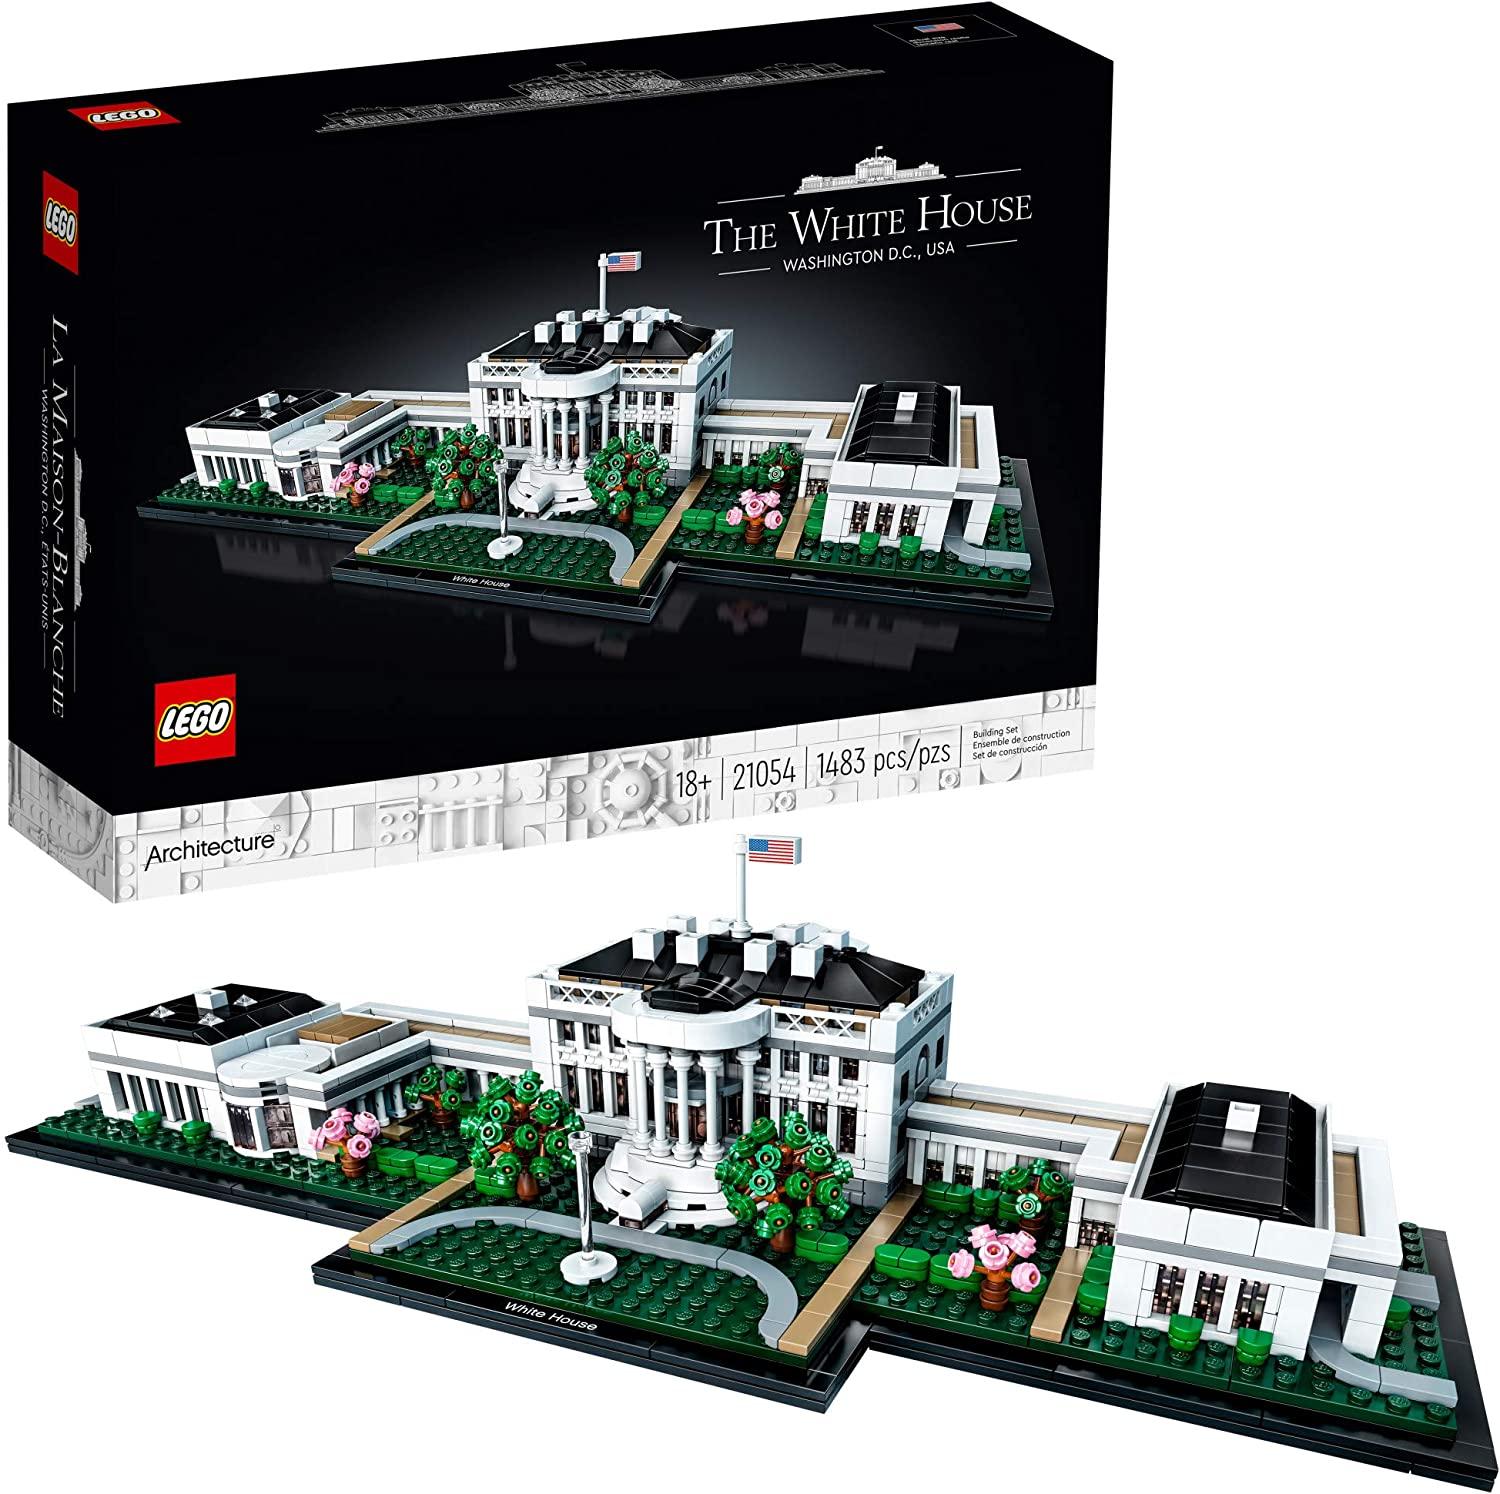 LEGO Architecture Collection The White House 21054 for $80 Shipped